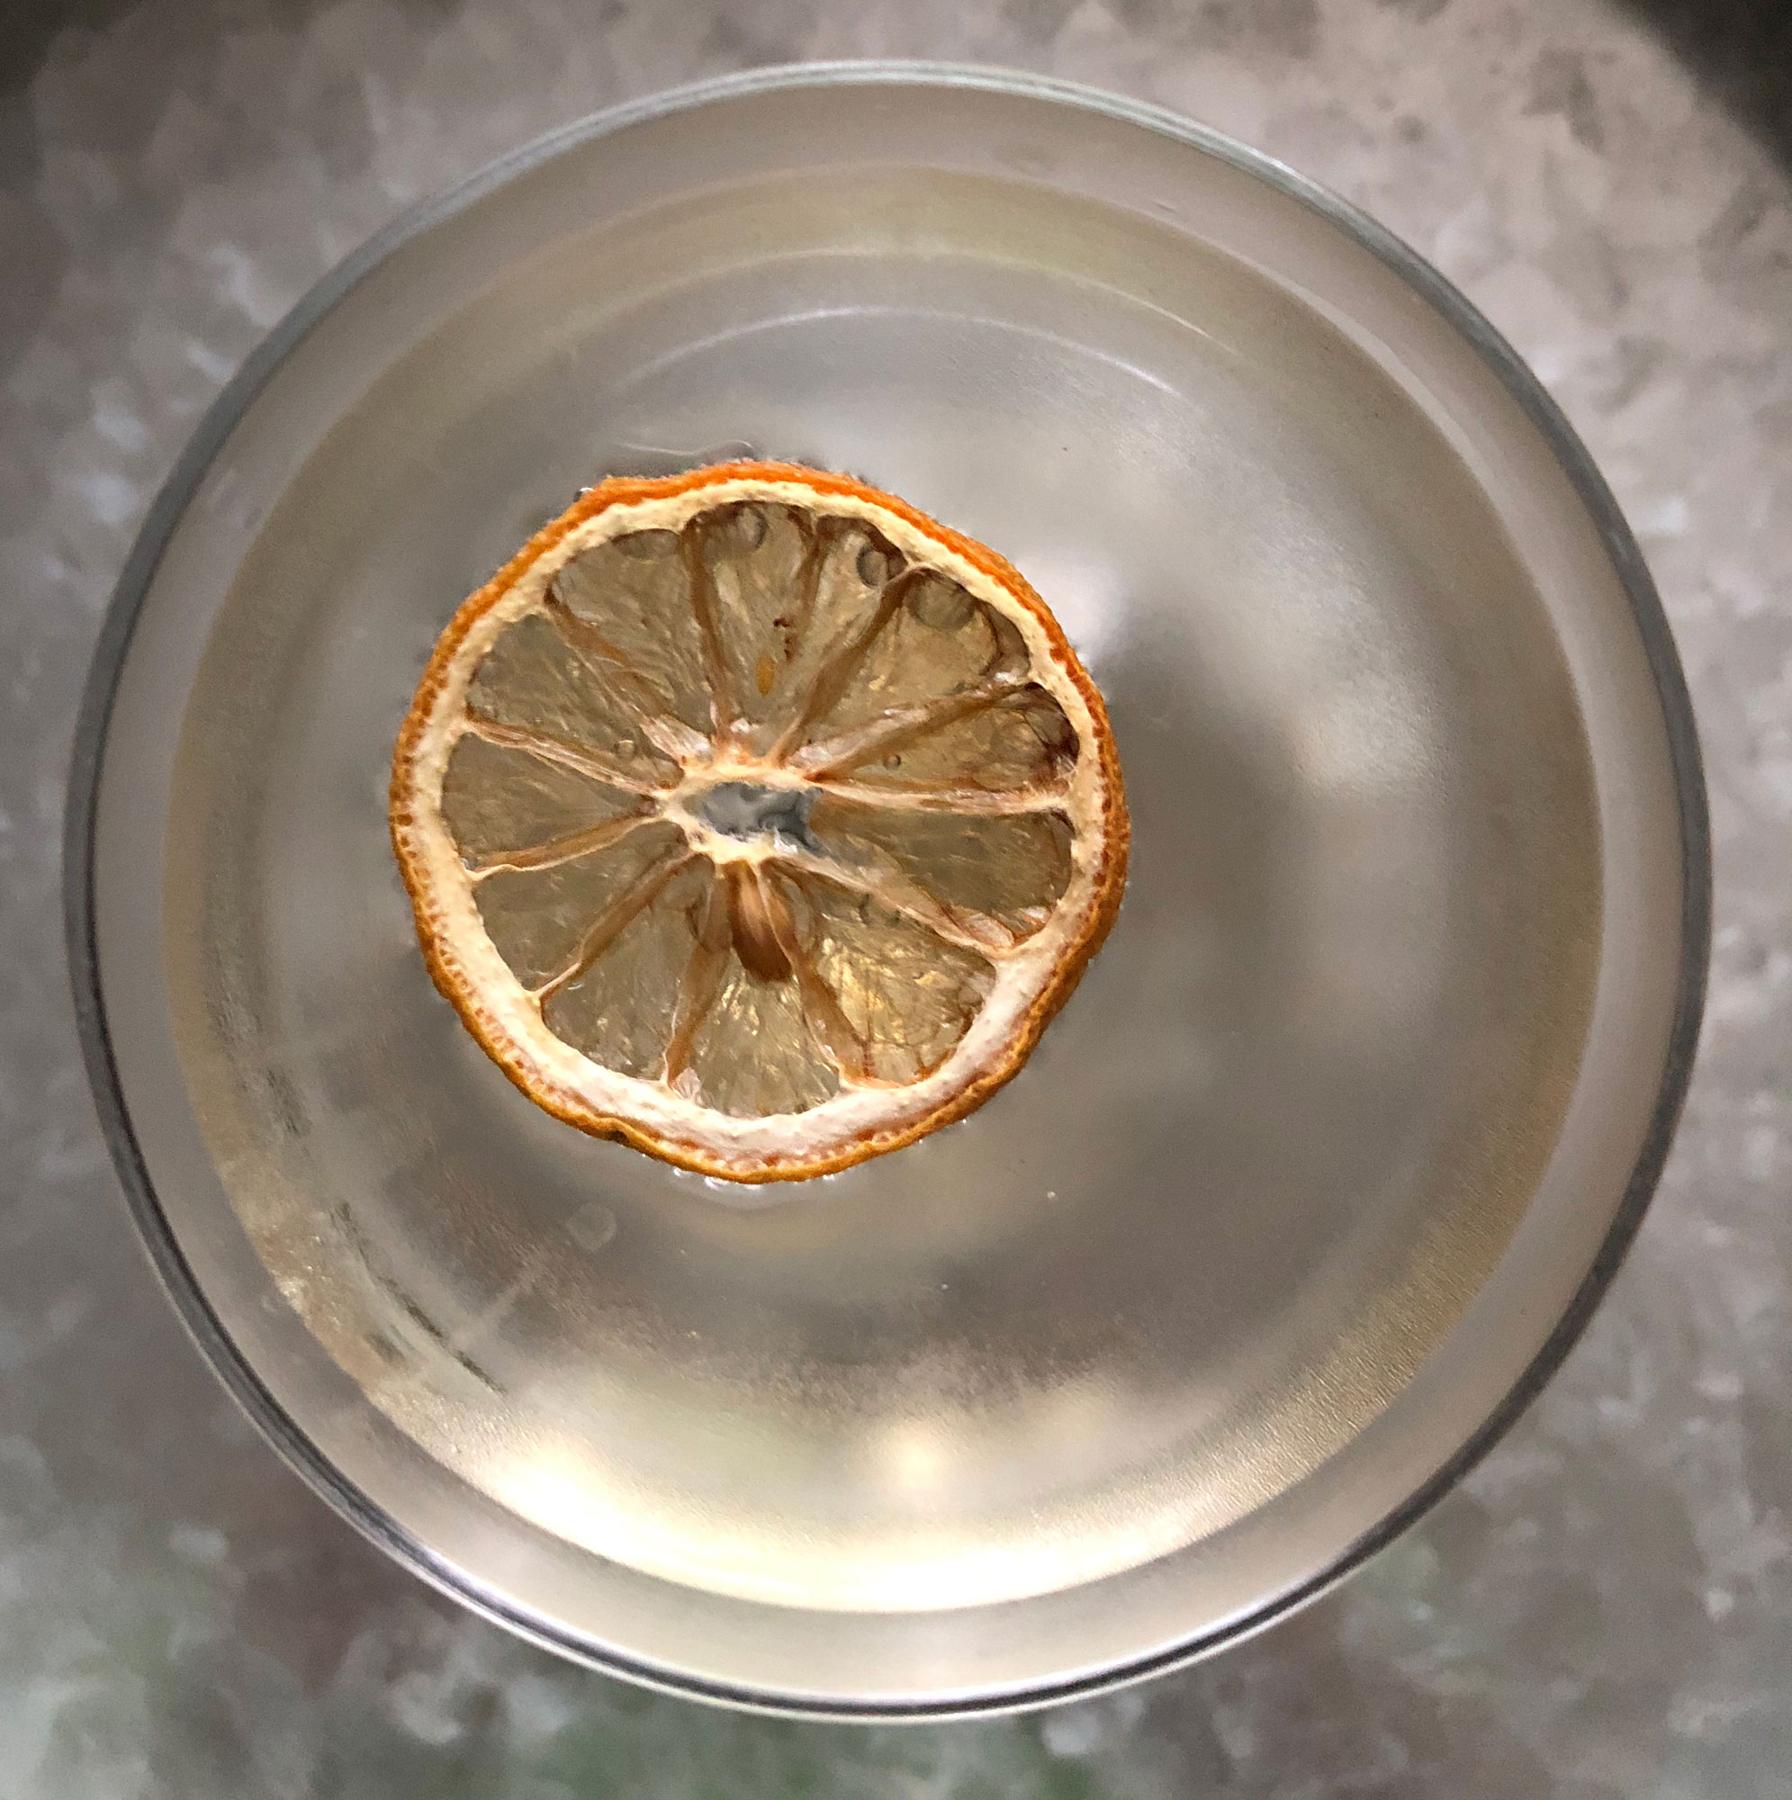 An example of the 24 de Enero, the mixed drink (drink) featuring blanco tequila, Dolin Blanc Vermouth de Chambéry, celery bitters, and lemon twist; photo by Lee Edwards